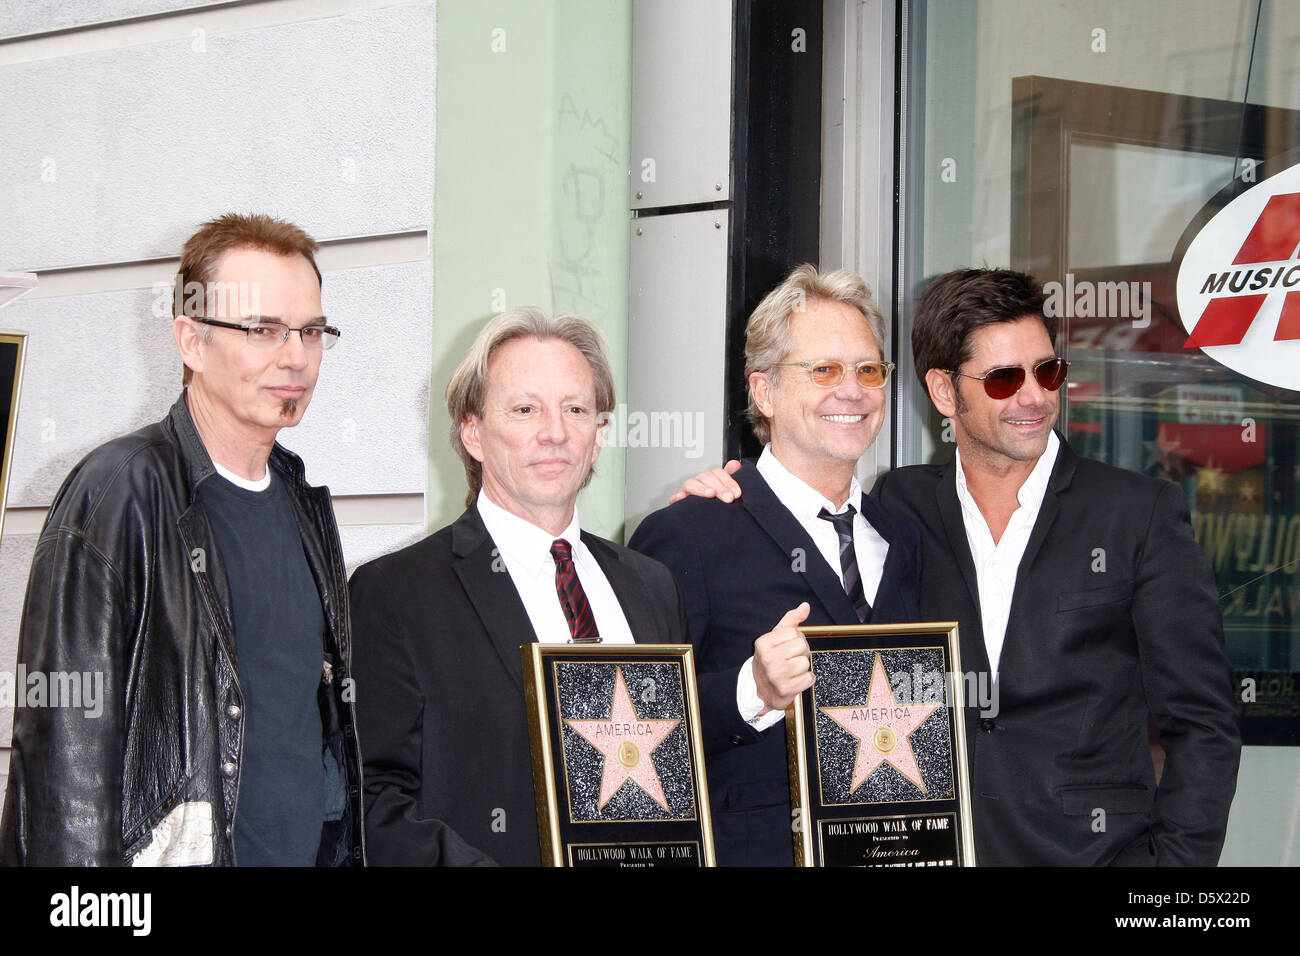 Billy Bob Thornton; Gerry Beckley; Dewey Bunnell; John Stamos The group America is honored with a Star on the Hollywood Walk of Stock Photo